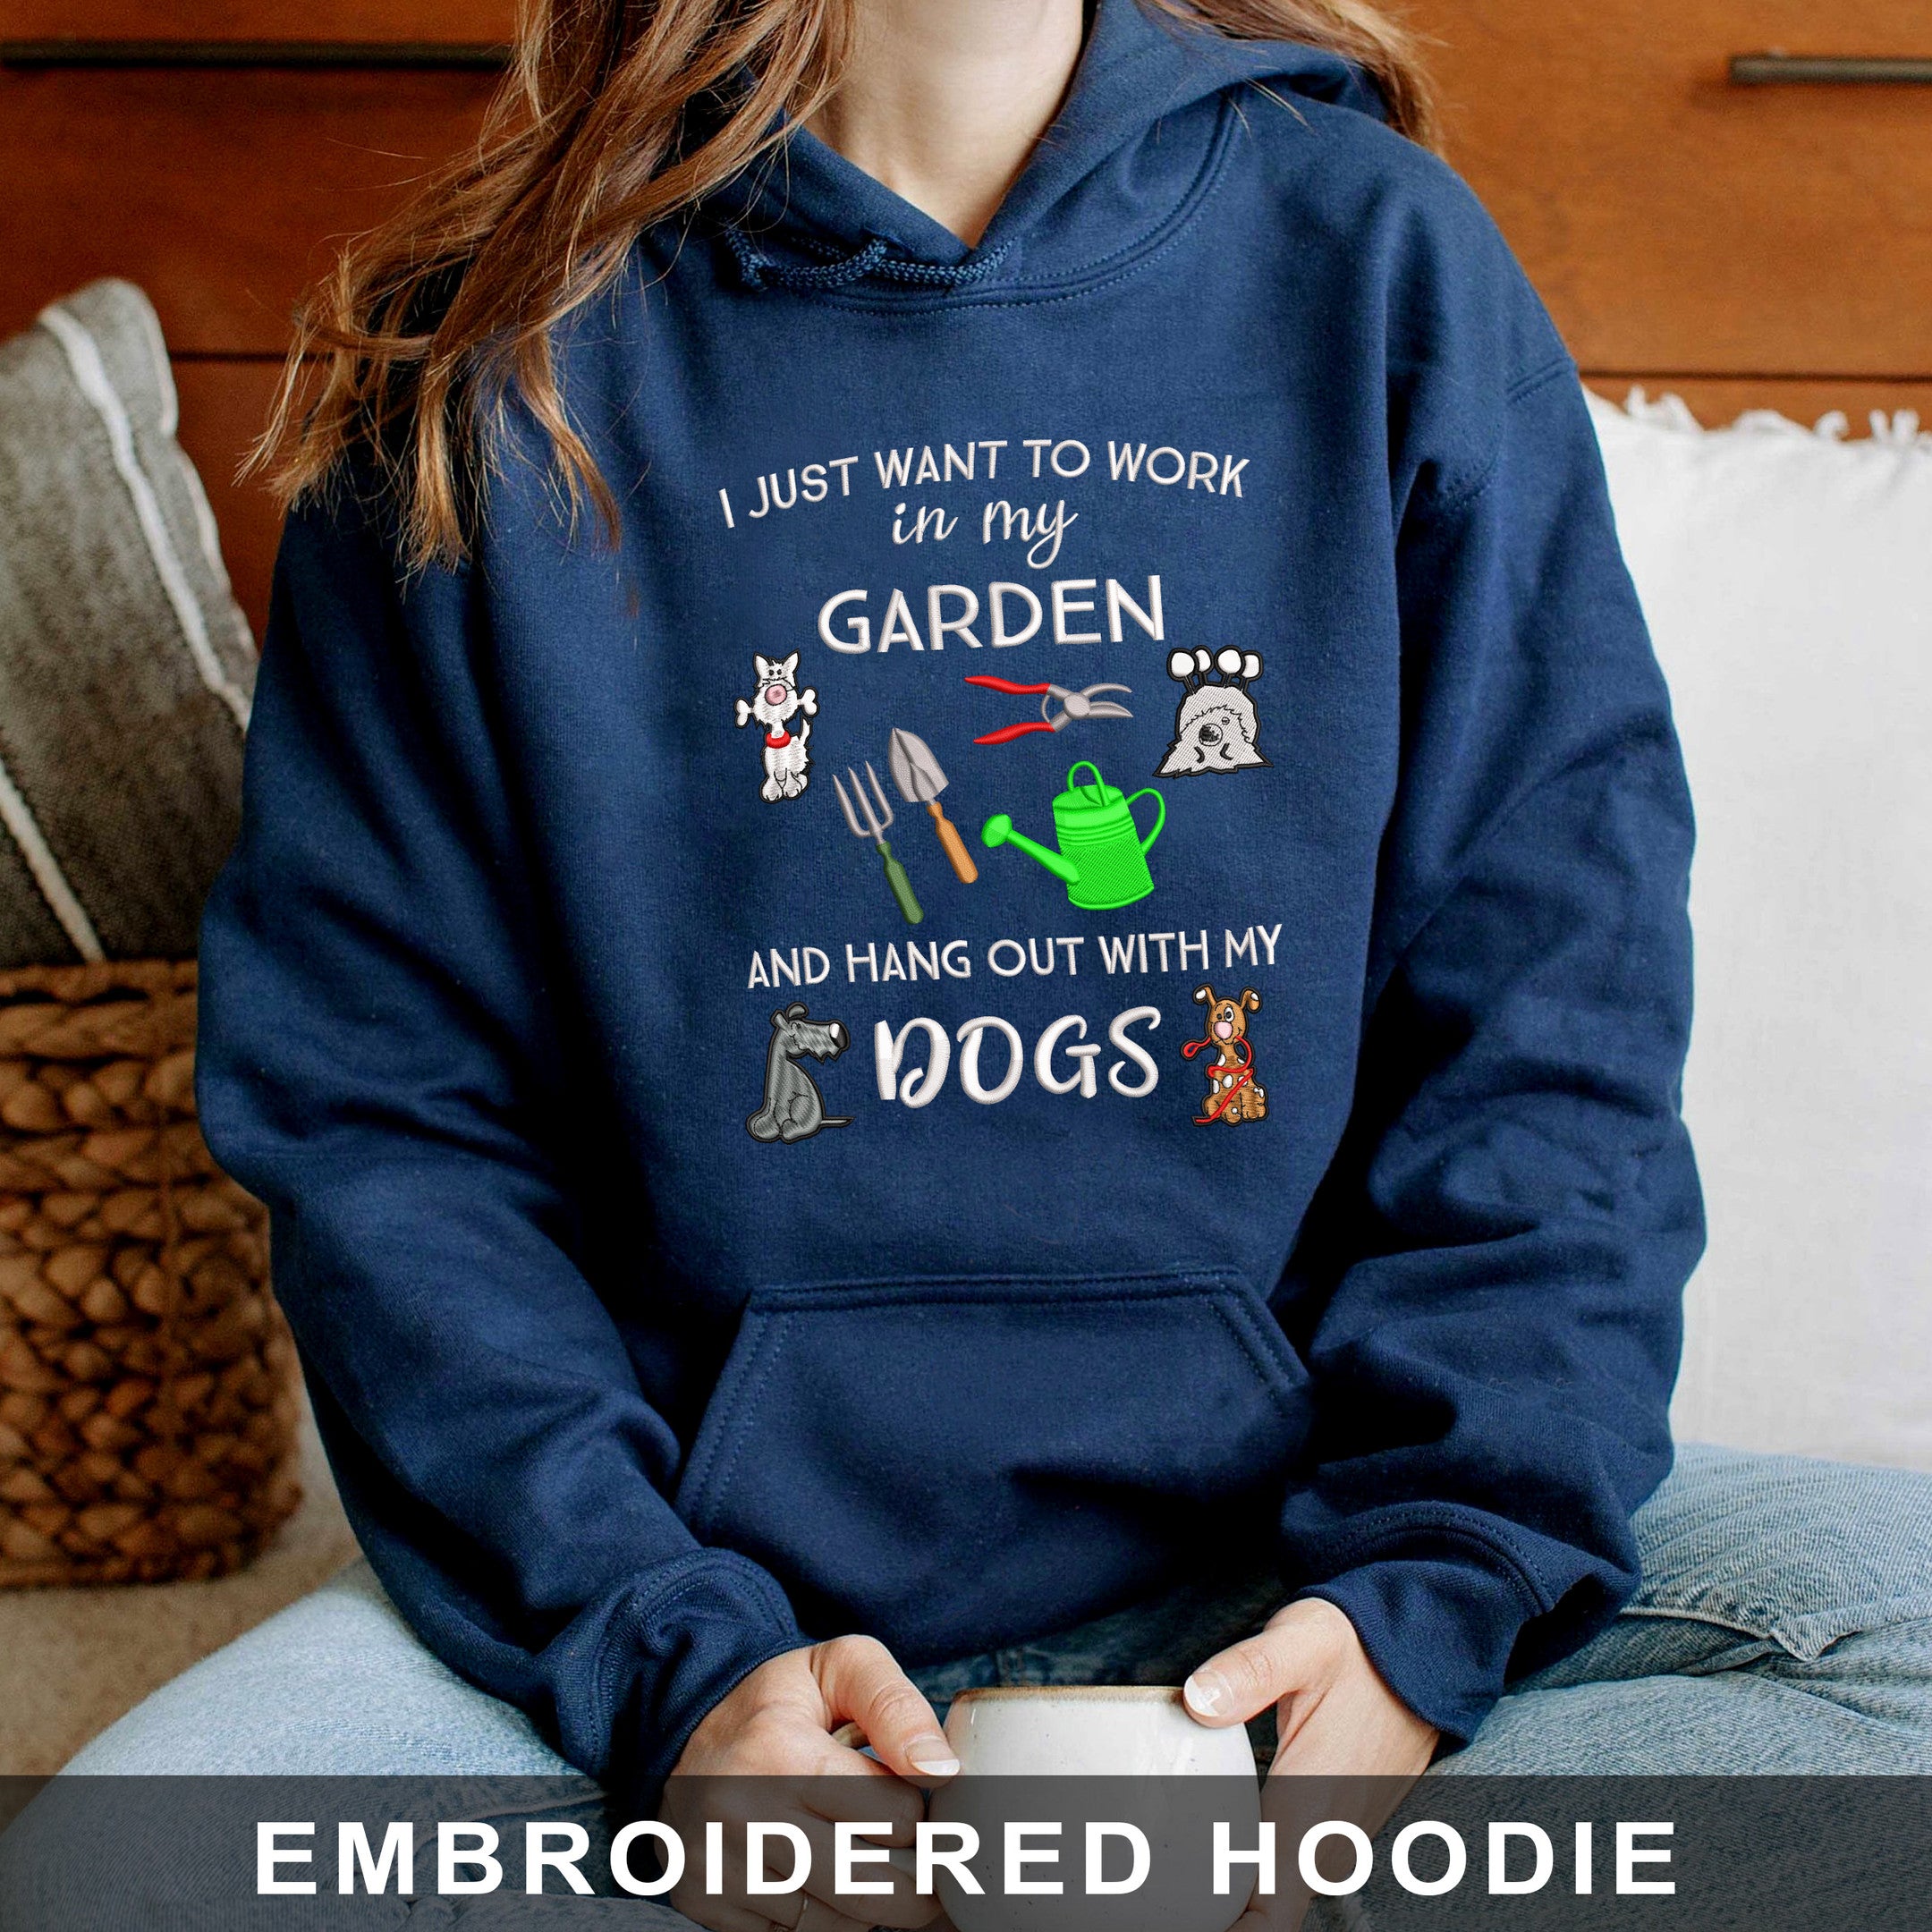 Garden And Hang out with Dogs Embroidered Shirt